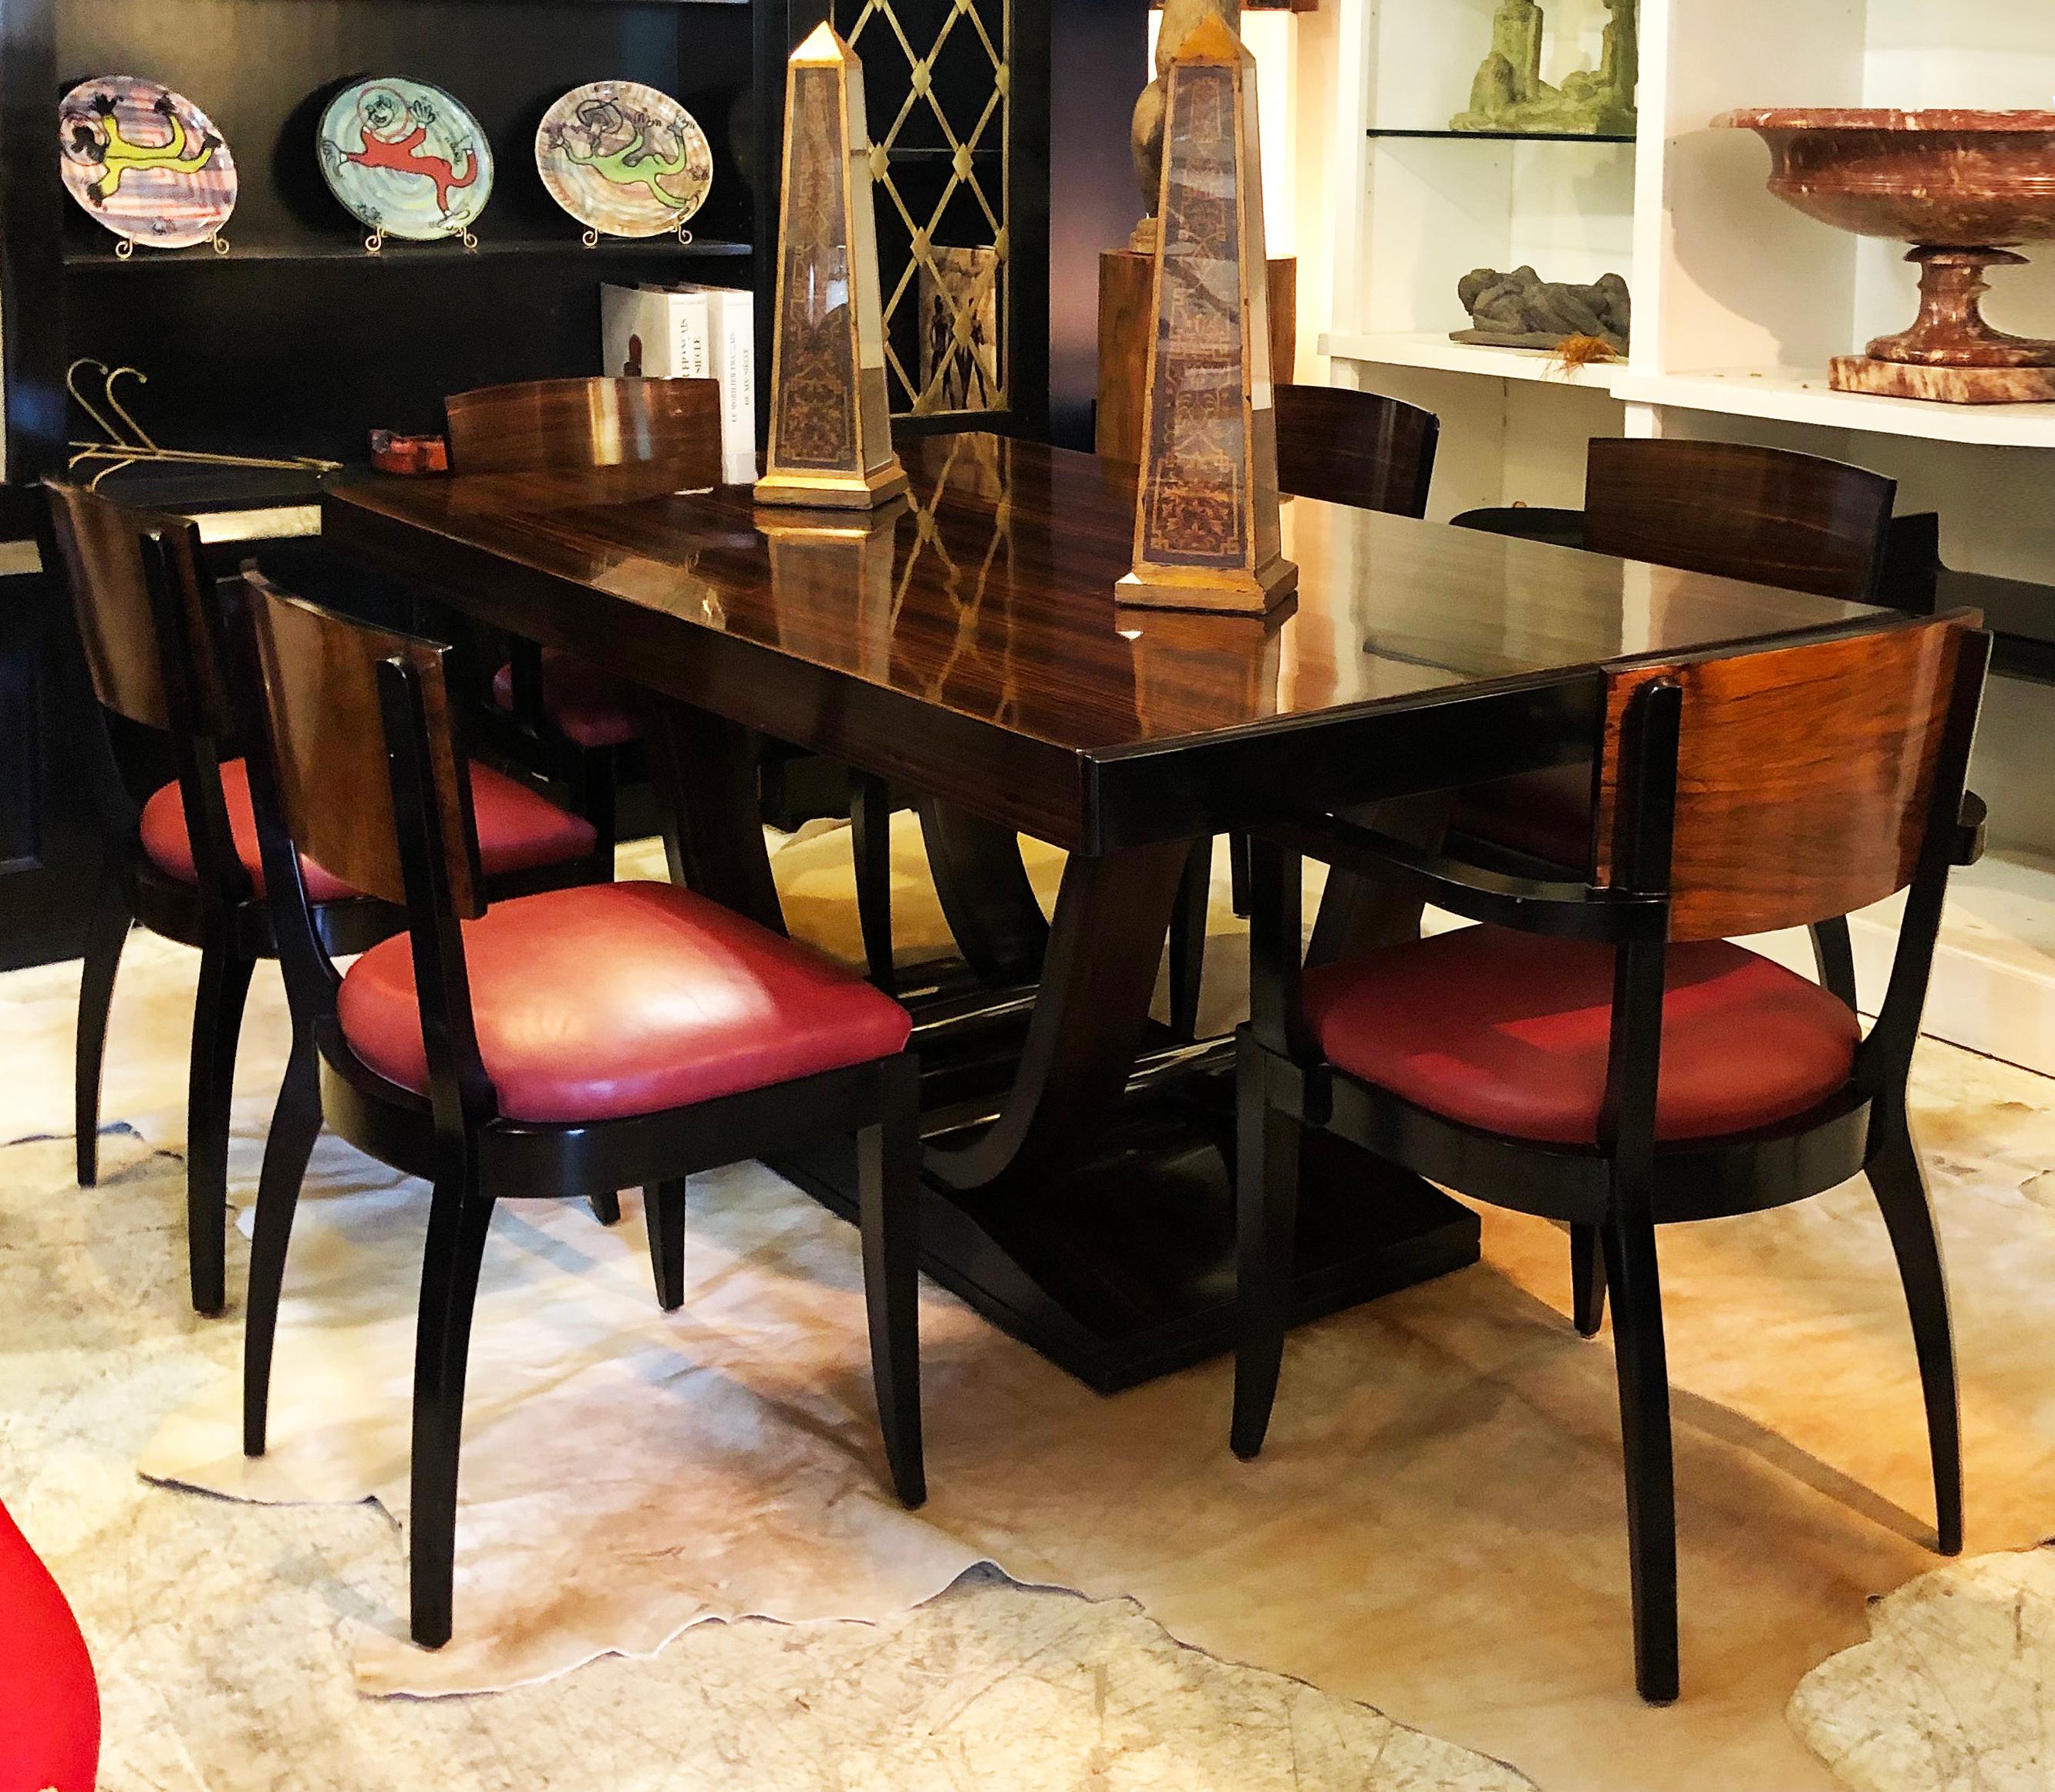 Art Deco Style Macassar ebony dining table and 6 chairs, black lacquered

Offered for sale is an Art Deco style macassar ebony and black lacquered dining table with two leaves and six chairs (two armchairs and four side chairs). Armchairs measure